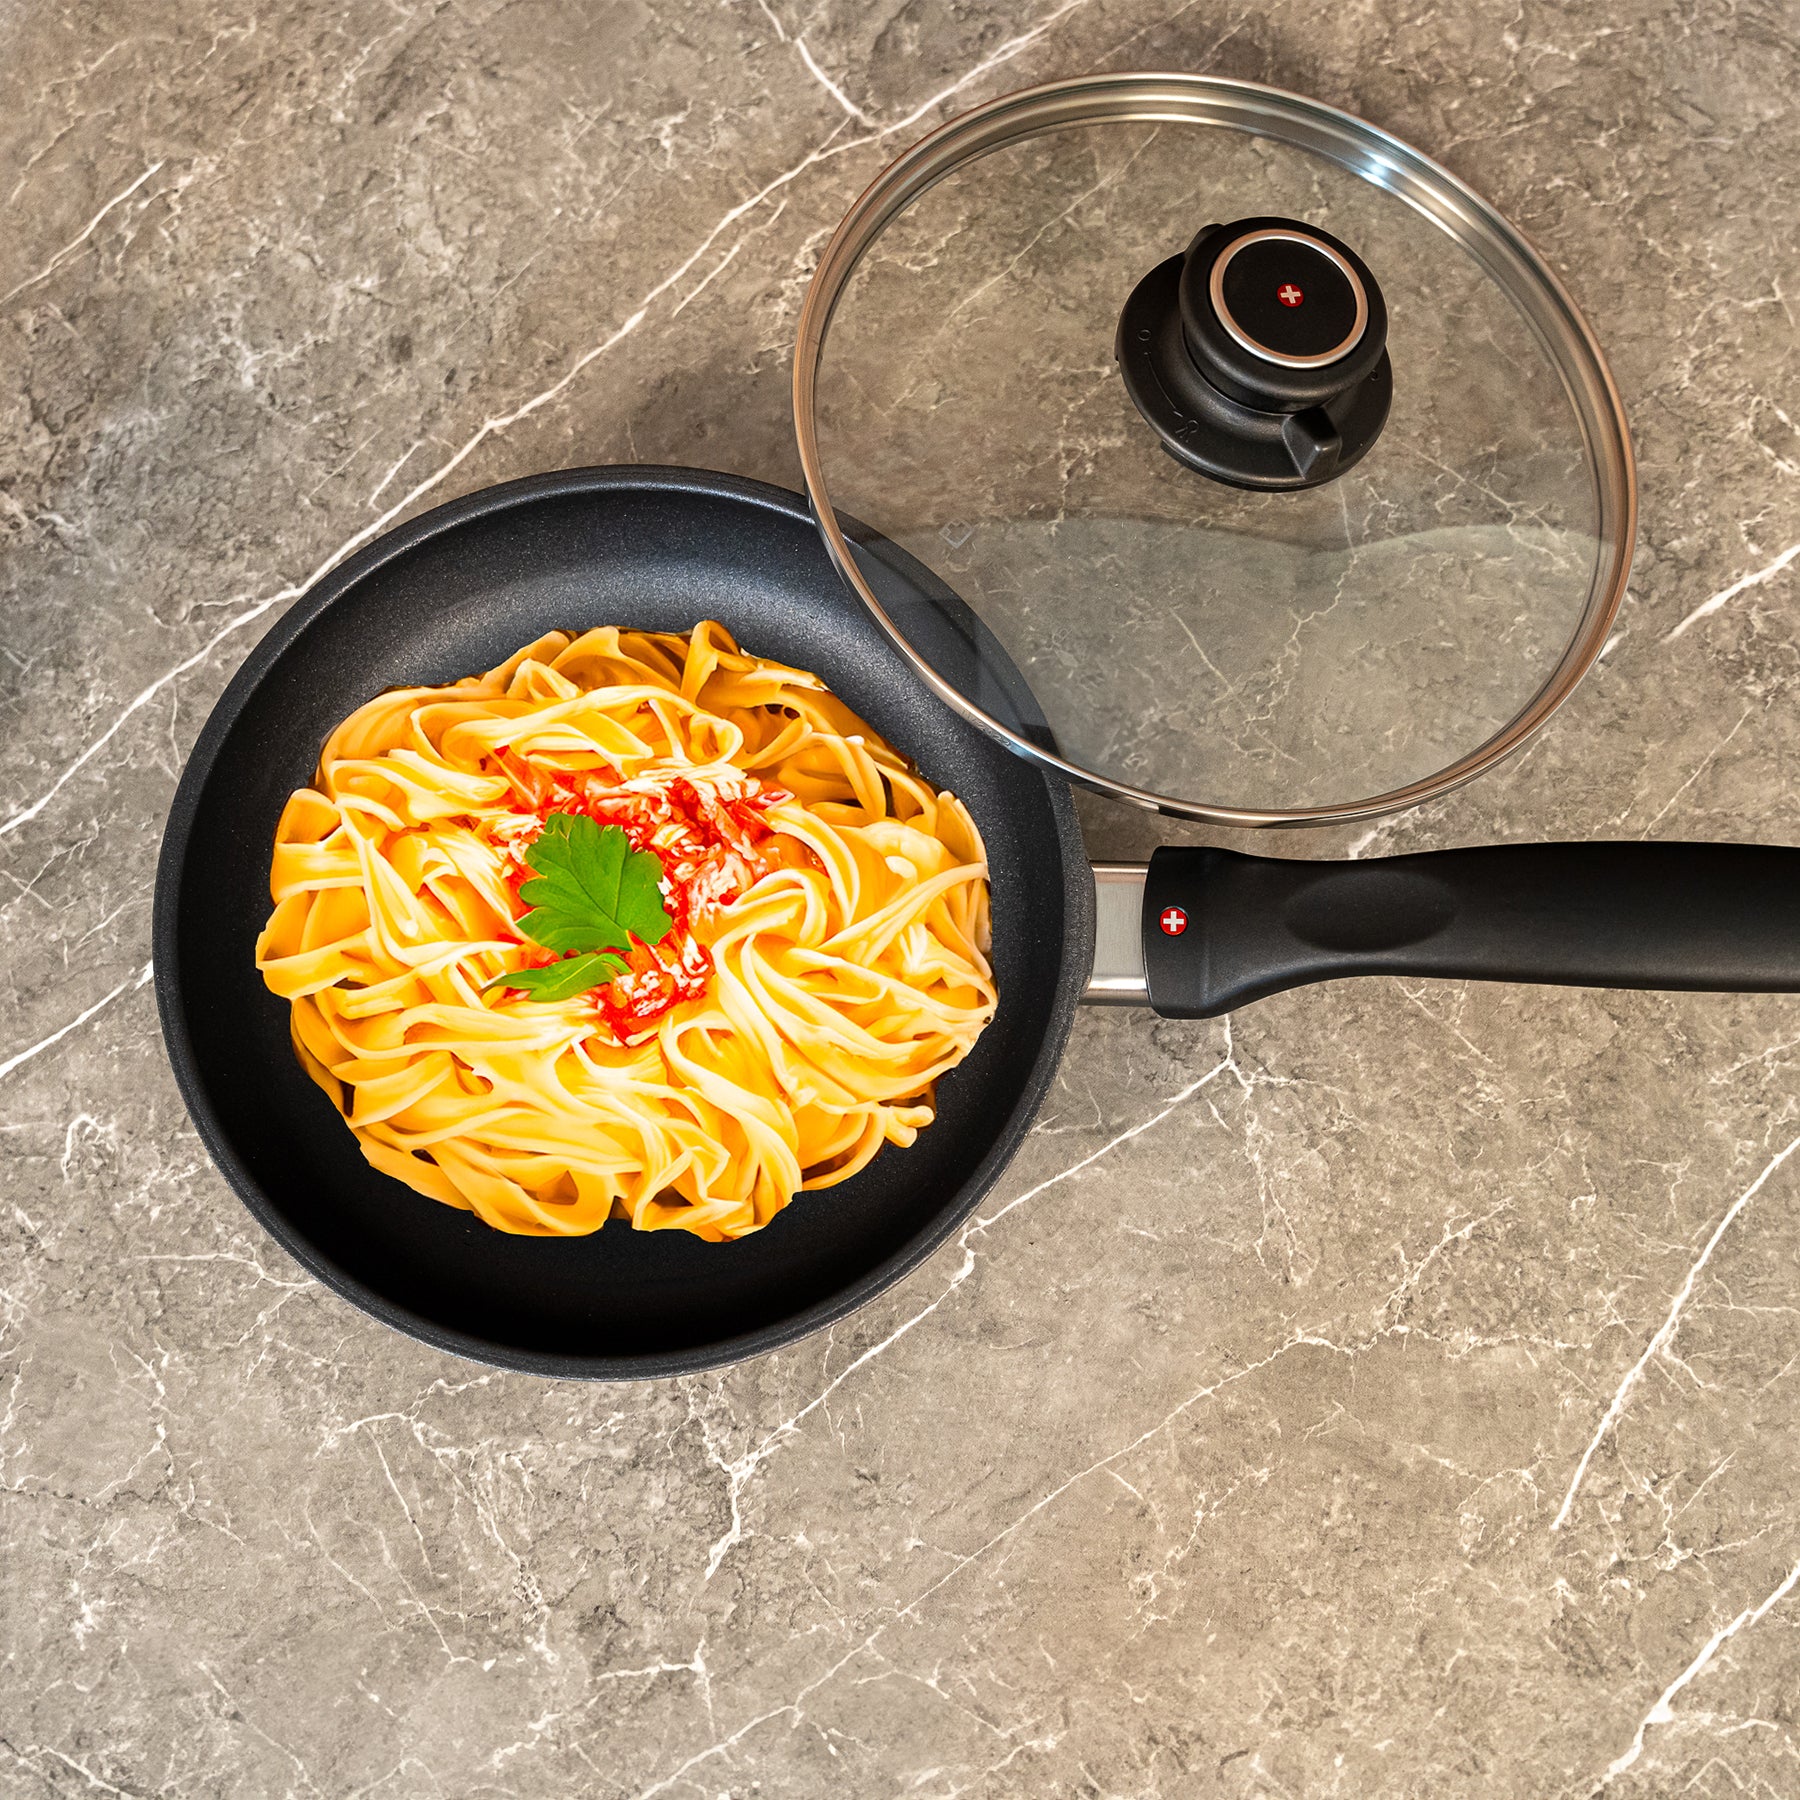 HD Nonstick Fry Pan with Glass Lid in use with pasta on surface